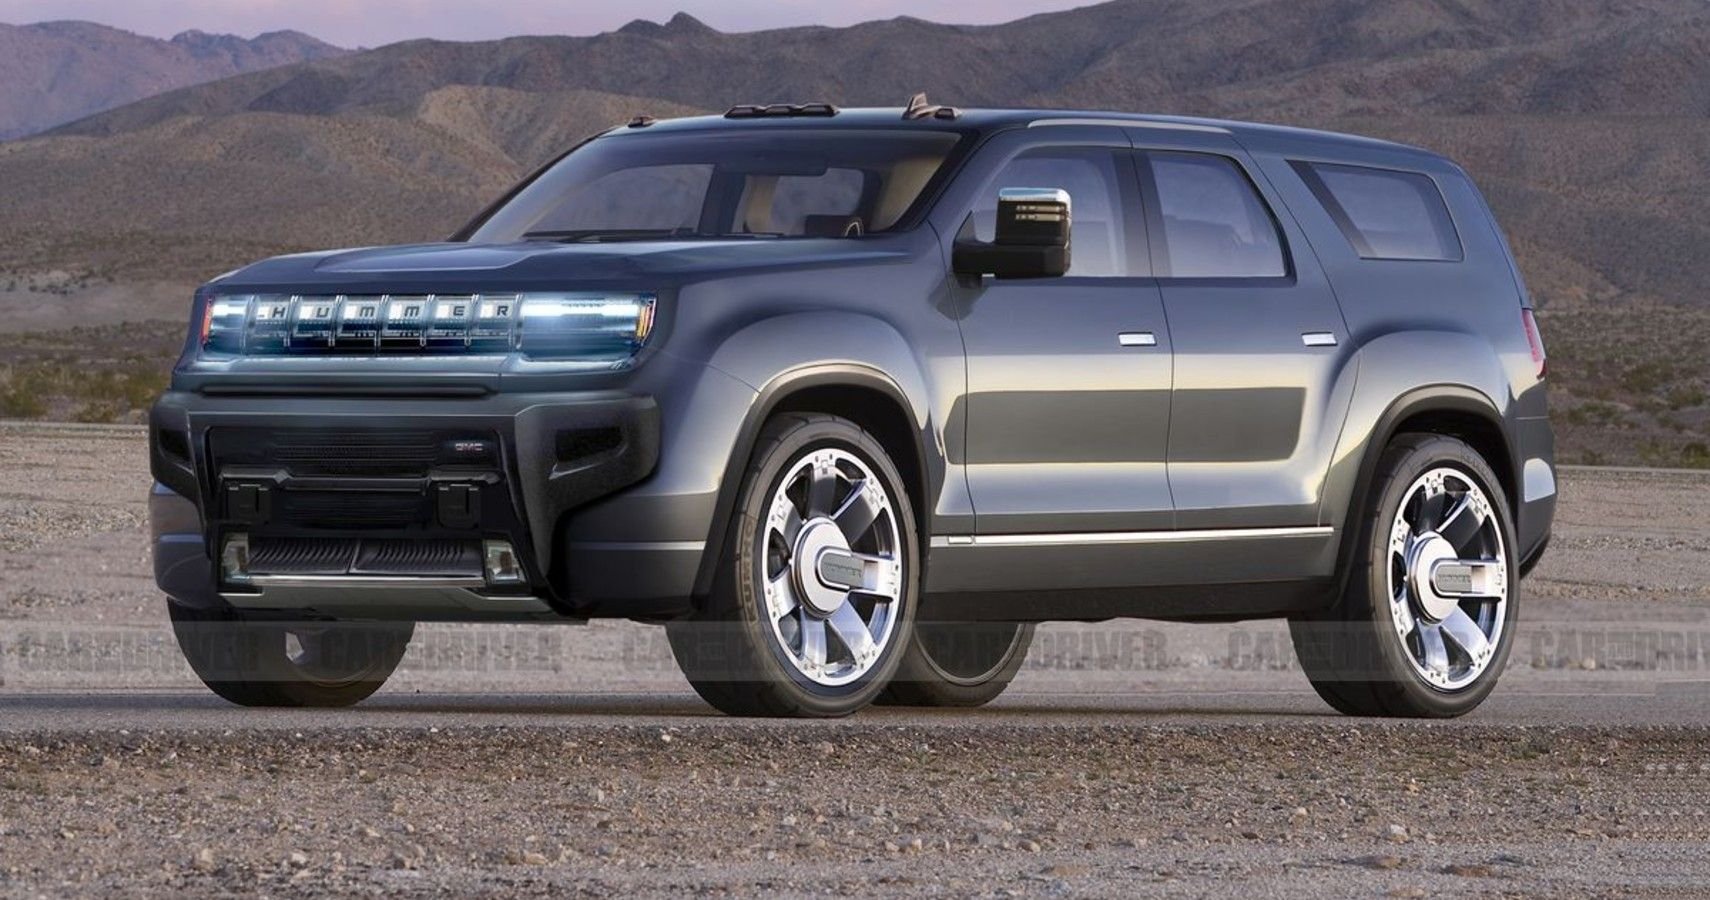 In The Spotlight: The New Hummer EV Pickup And SUV